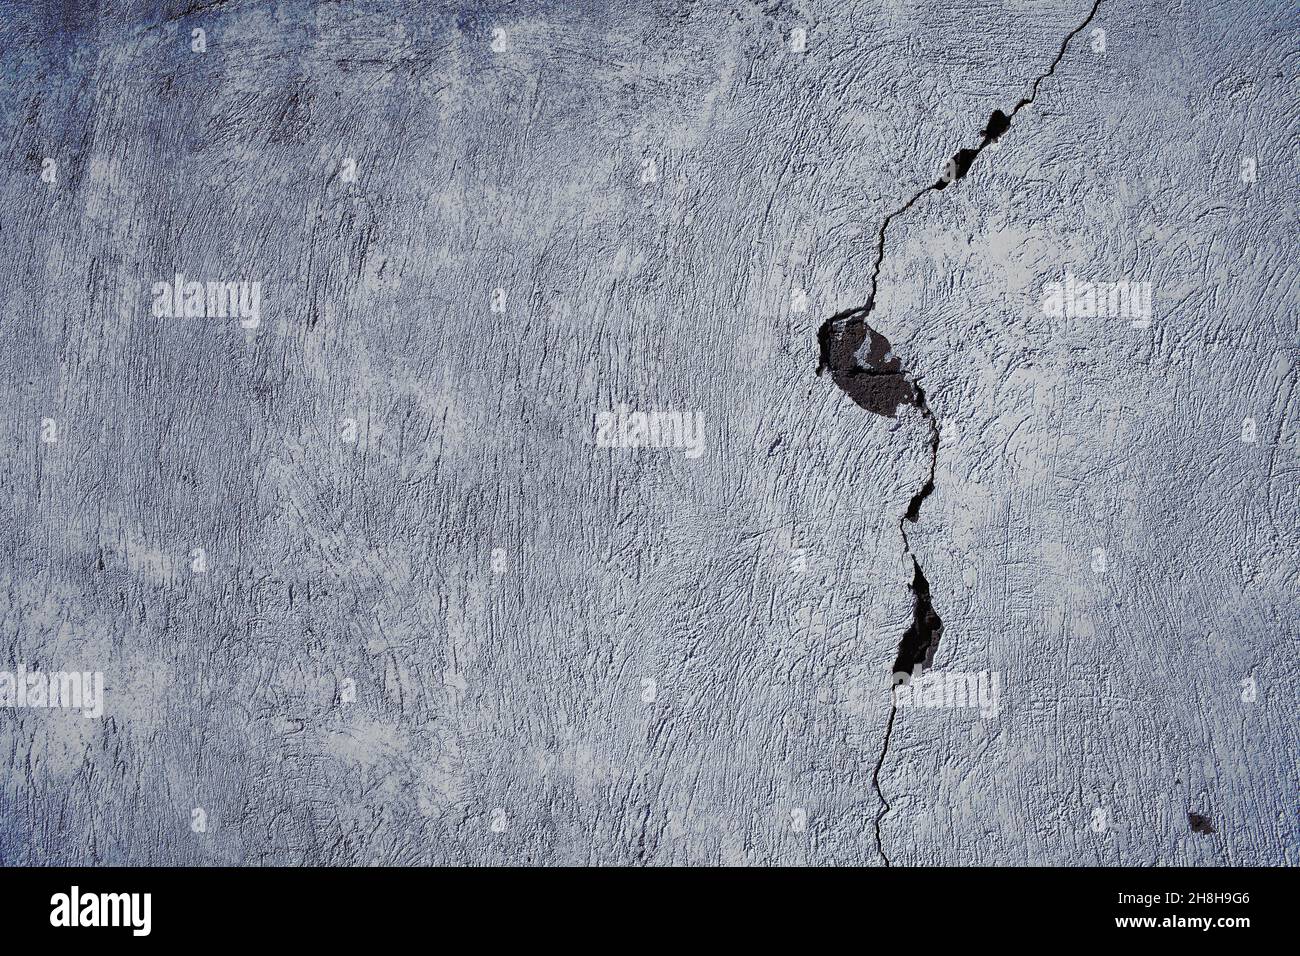 Cracked concrete wall with damaged surface, textured background. Stock Photo